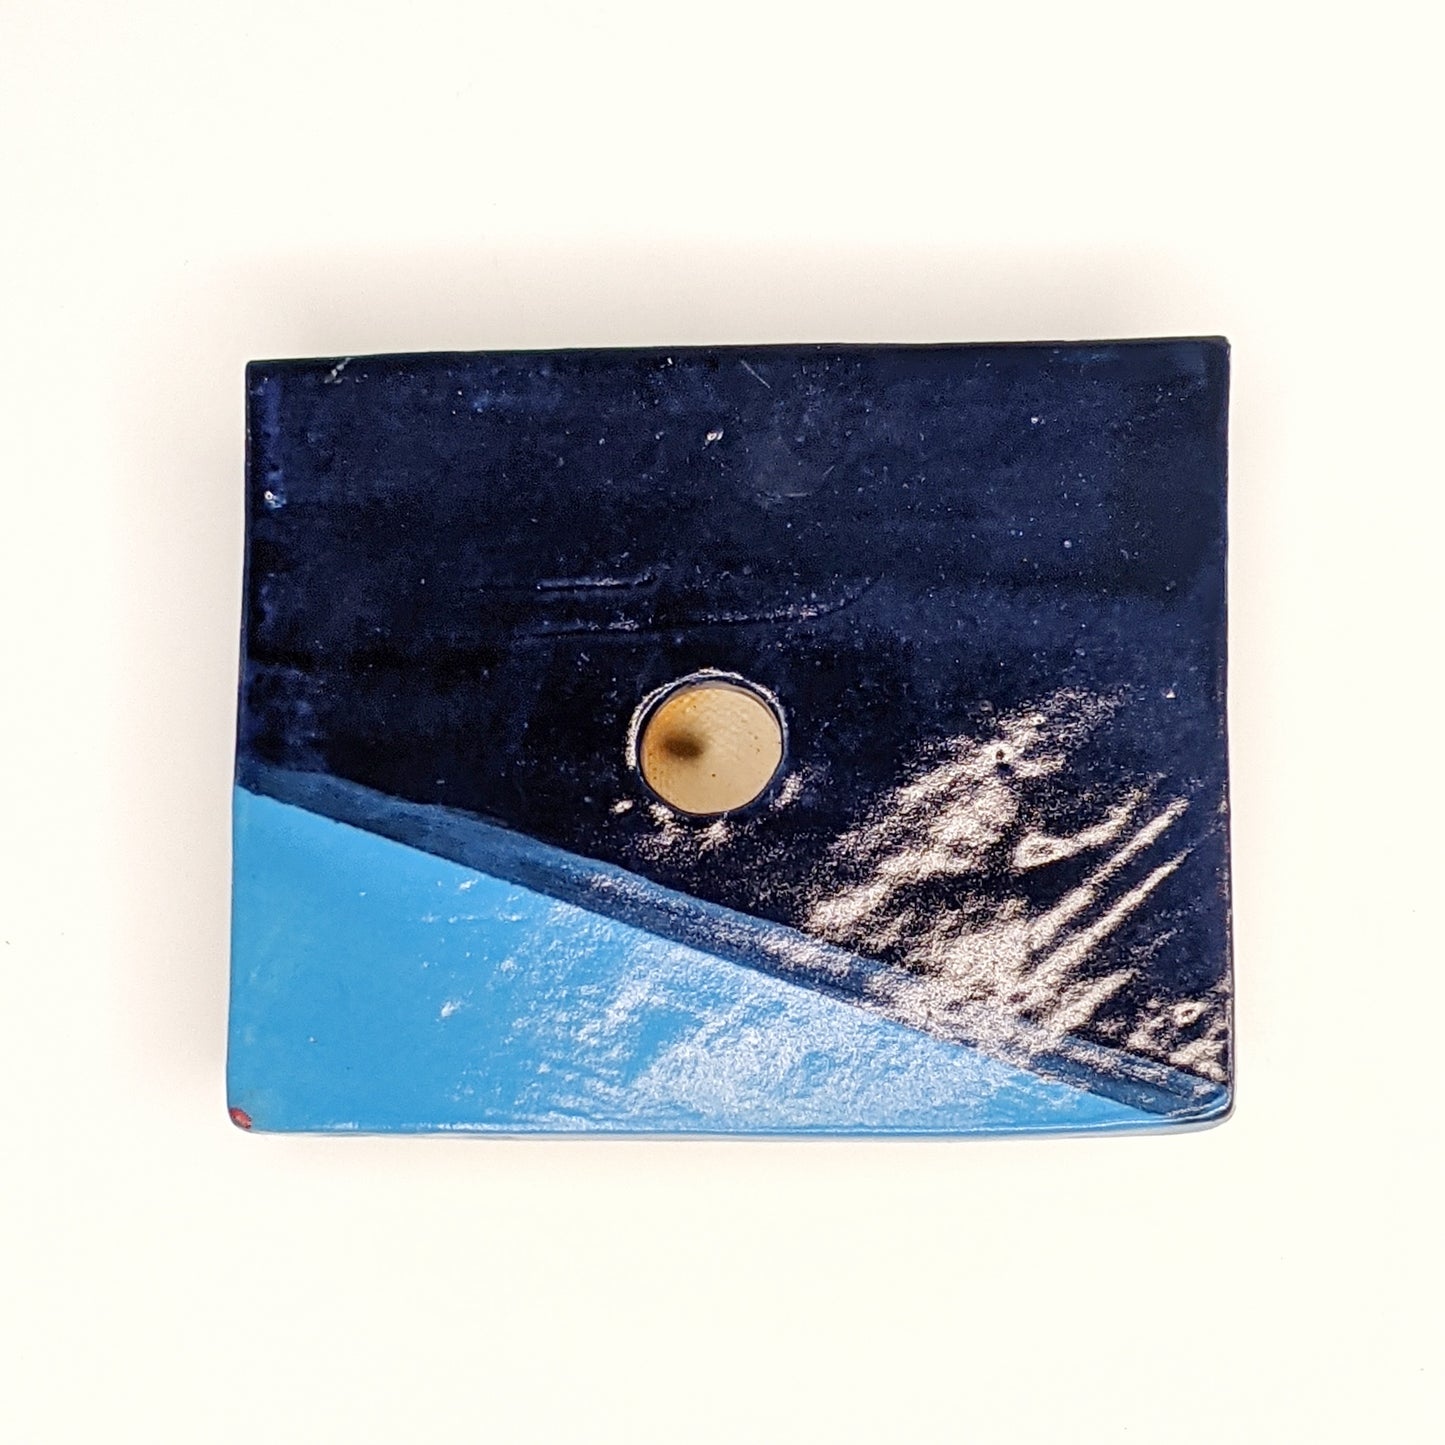 One of a kind soap dish in vibrant nigh blue and sky blue inspired by a wave on the shore.